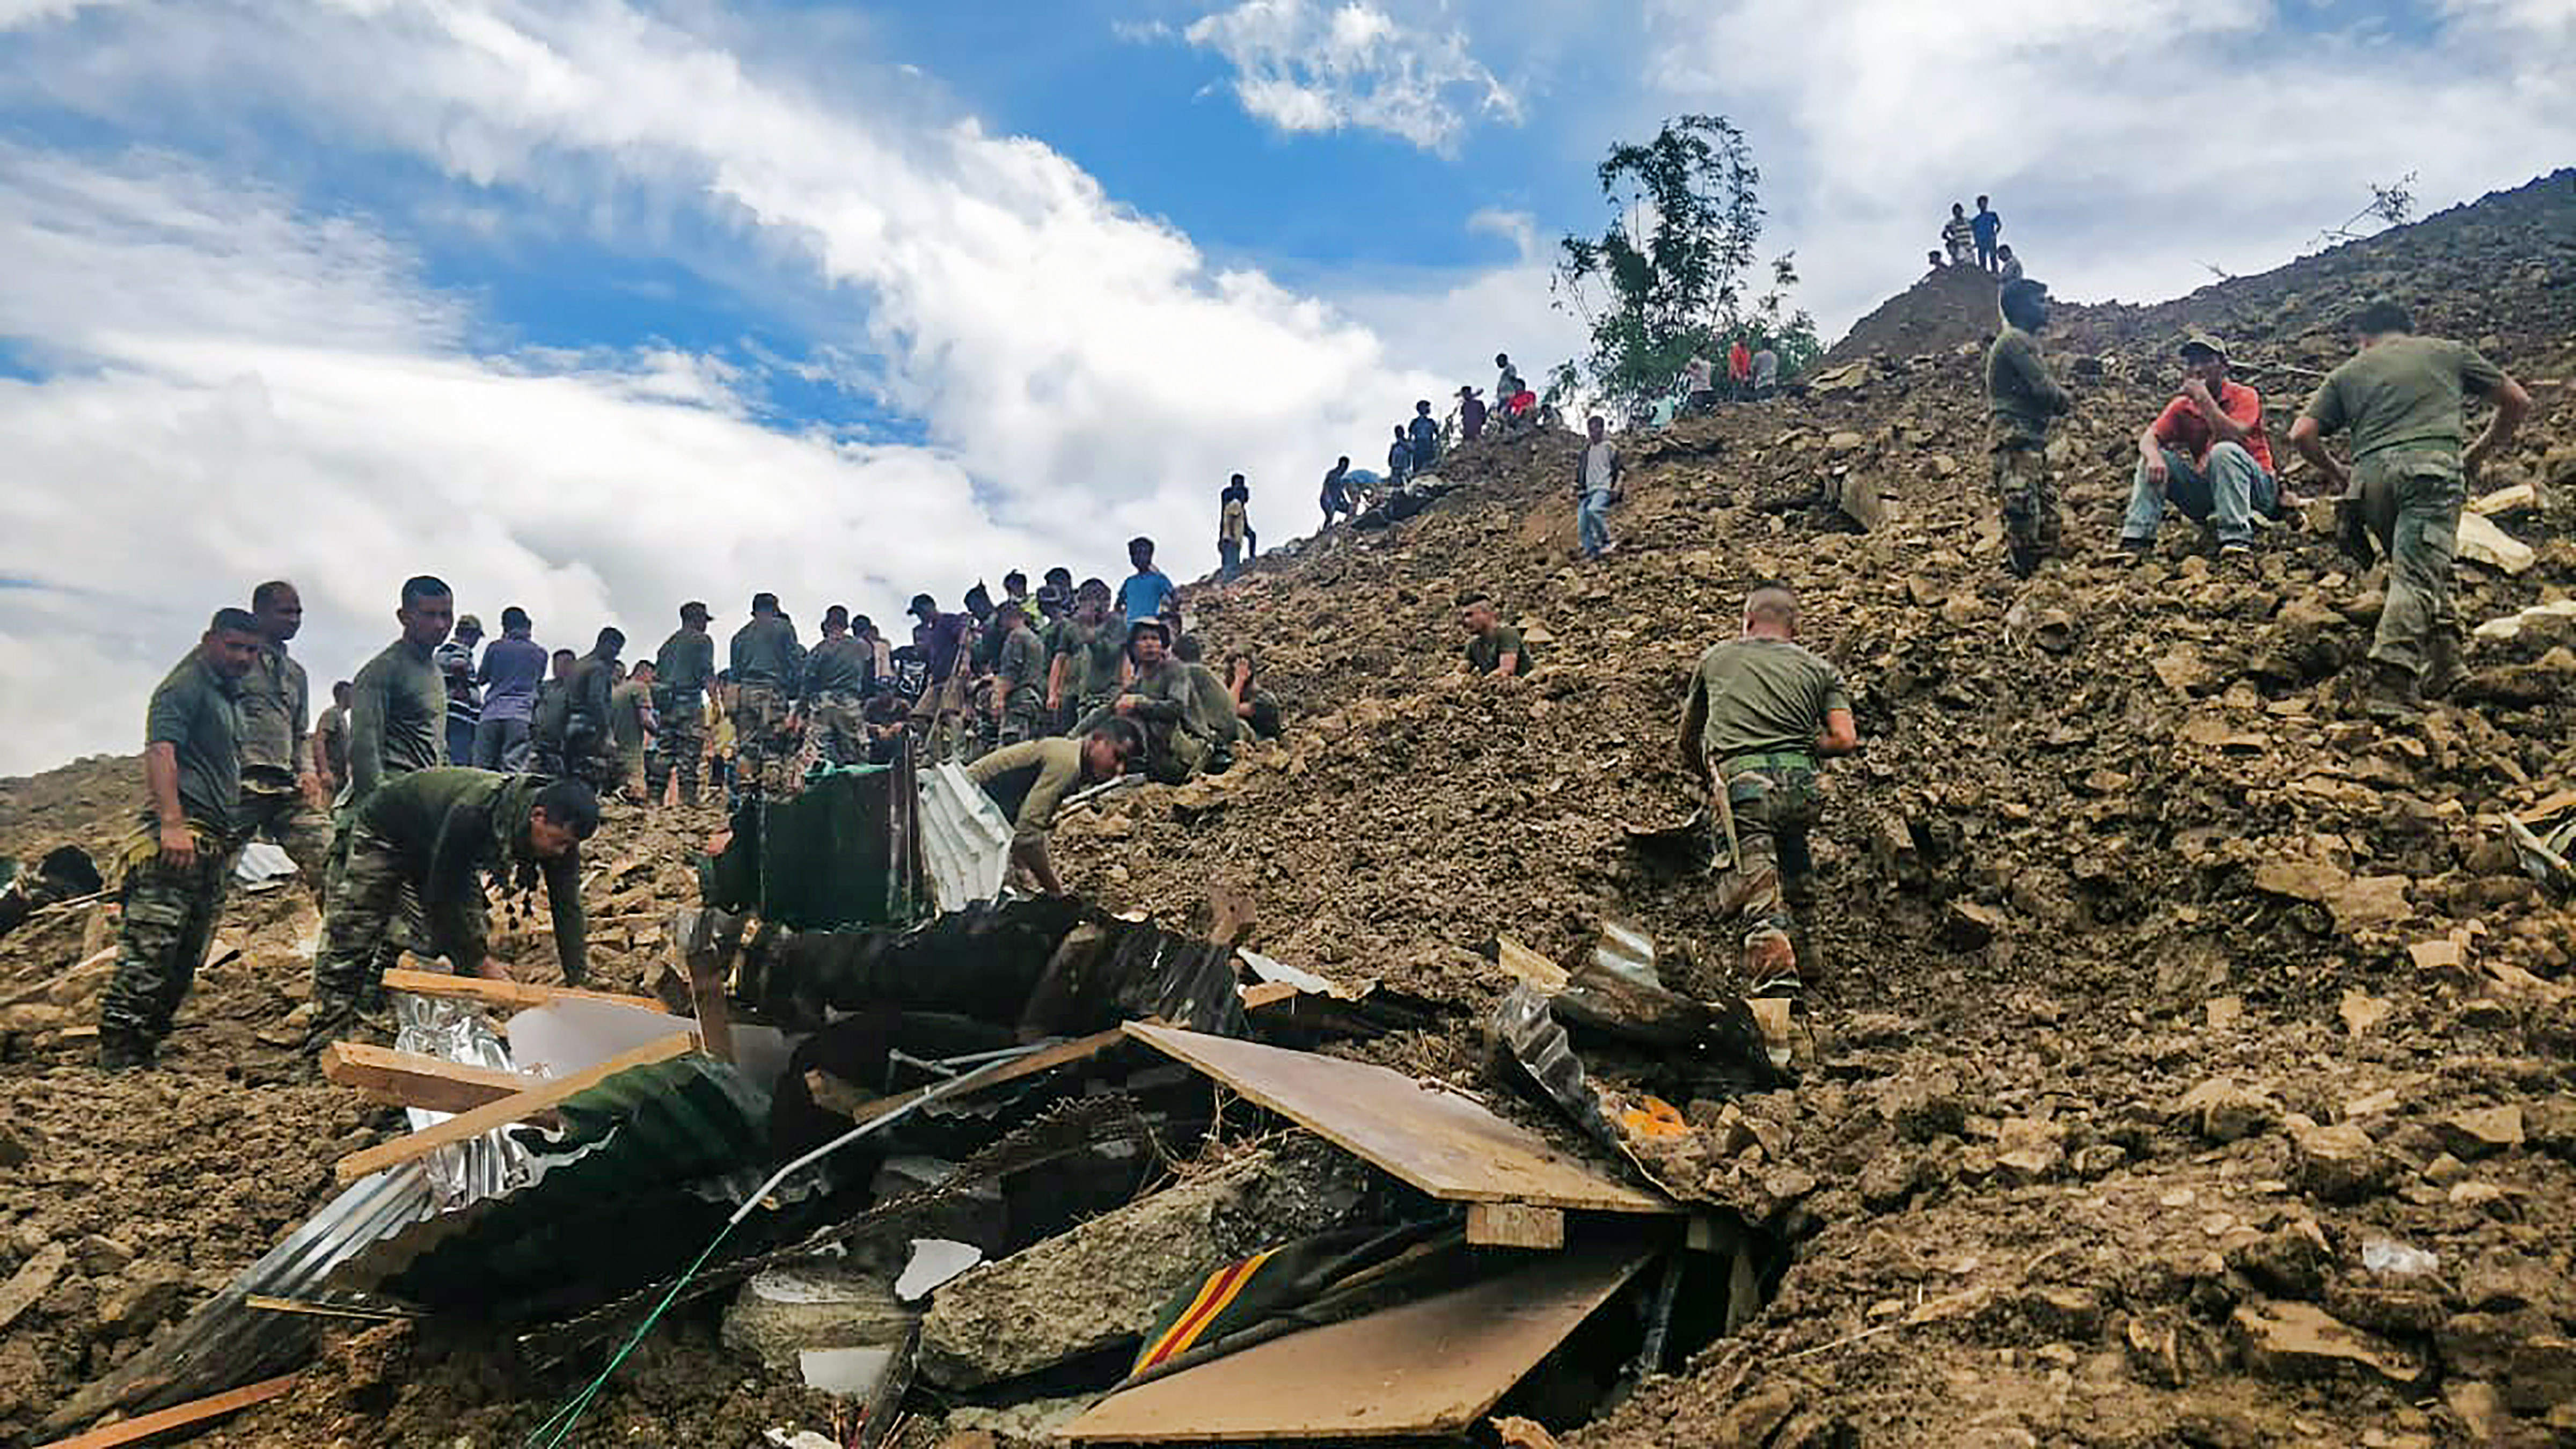 Seven soldiers among 8 dead, 50 missing as landslide hits Army post in Manipur